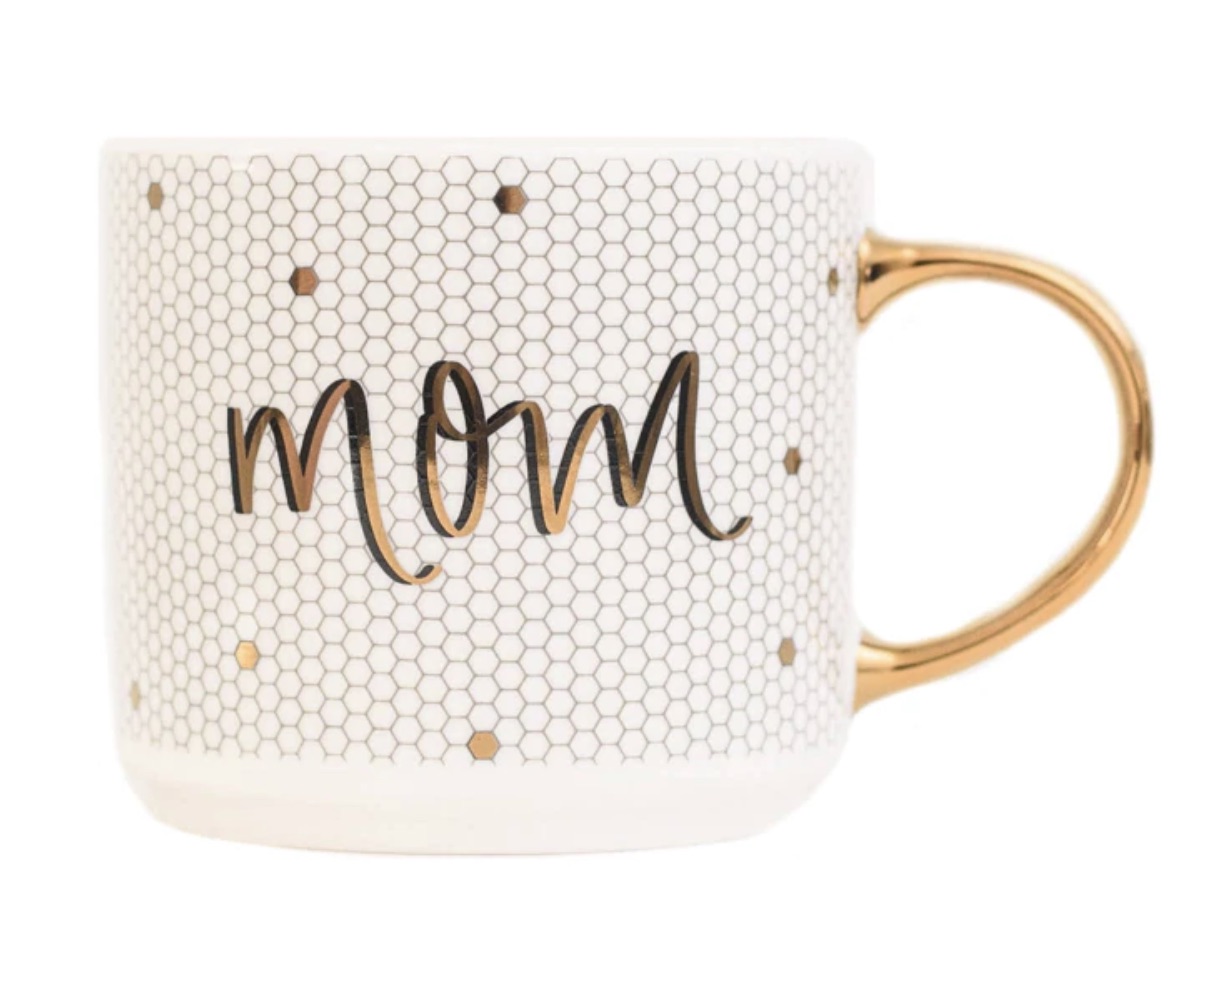 A photo of a mug that says mom and has a gold handle